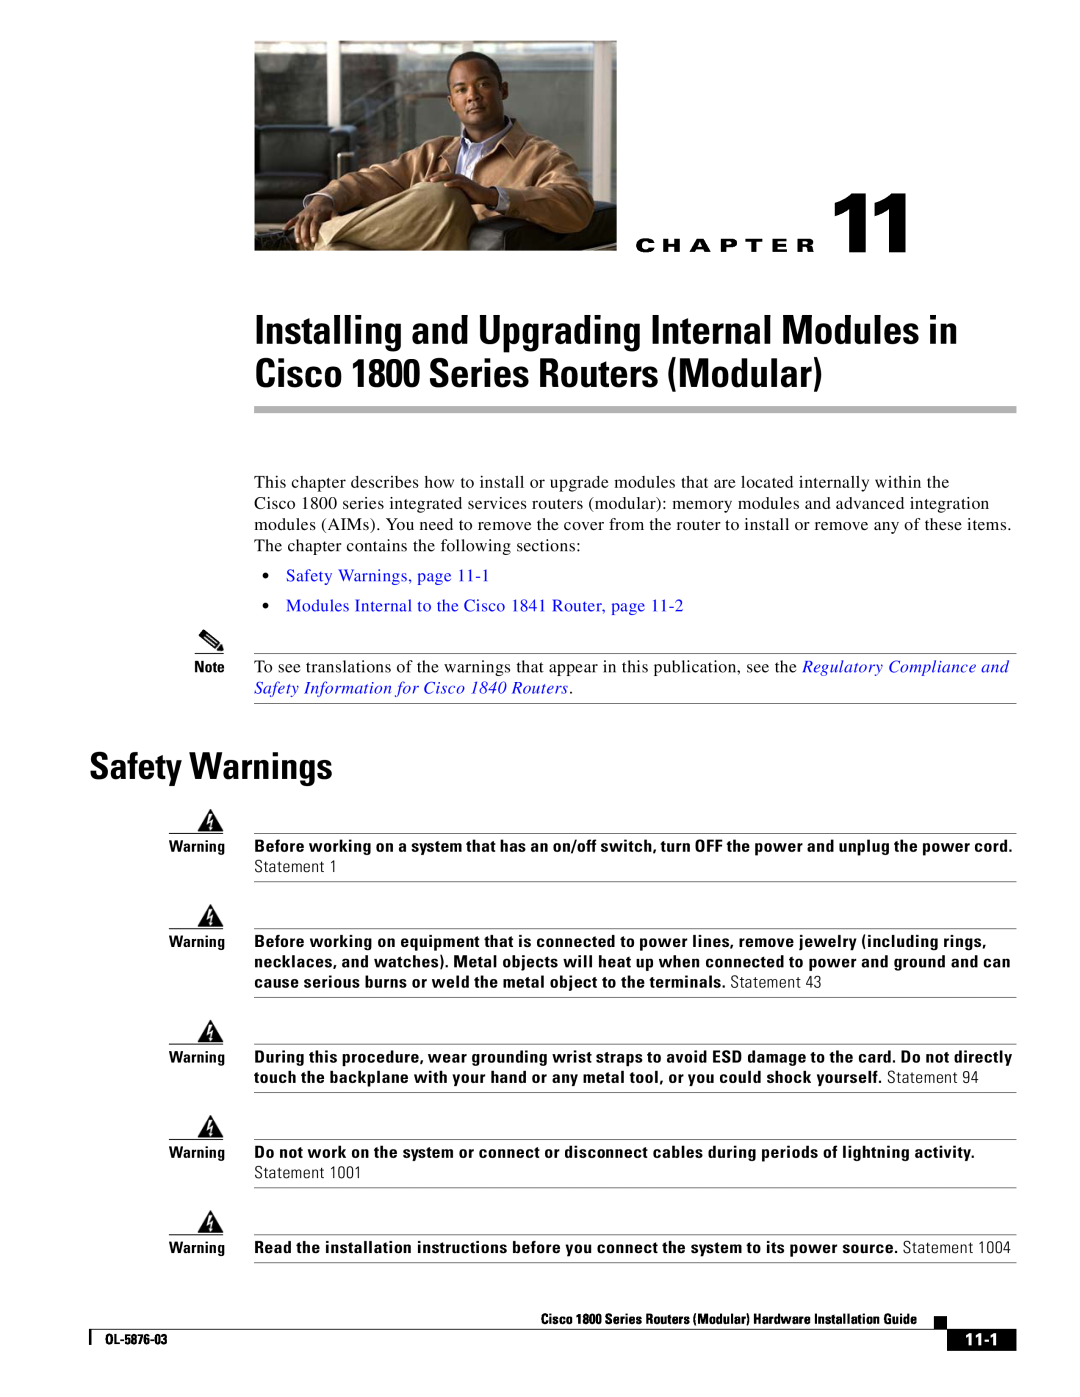 Cisco Systems CISCO1841-HSEC/K9-RF manual Safety Warnings, page Modules Internal to the Cisco 1841 Router, page, 11-1 